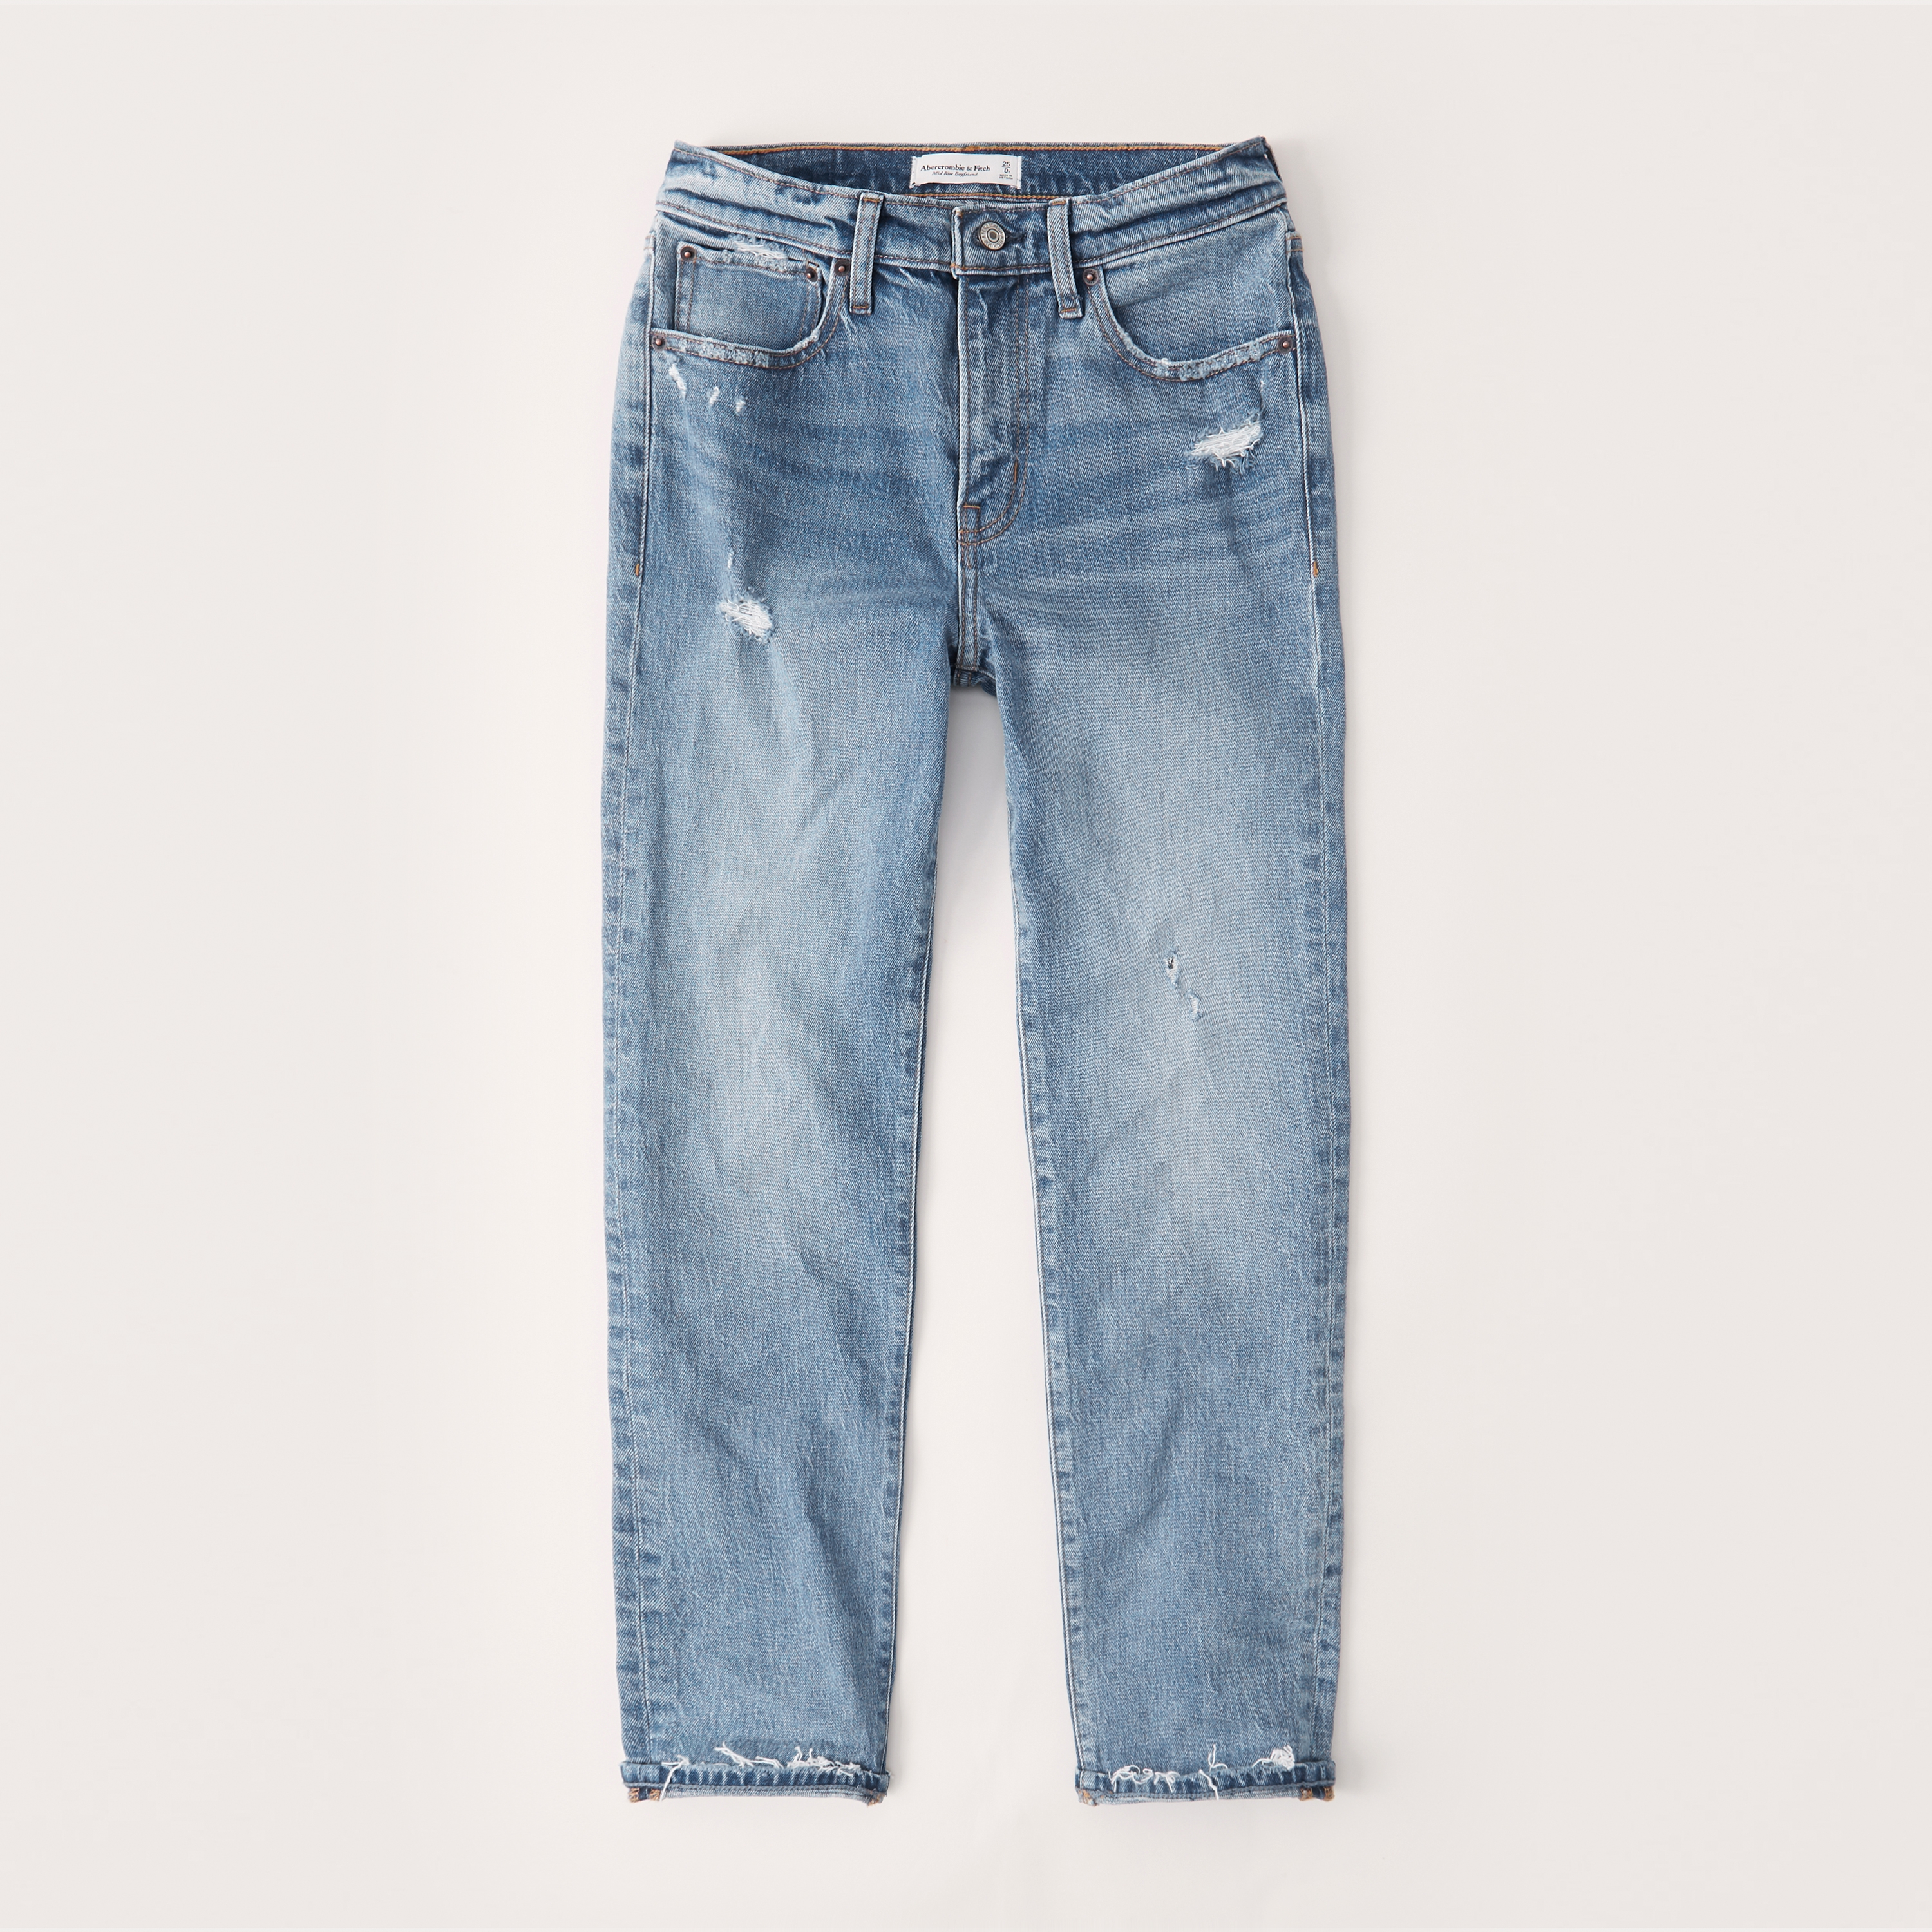 abercrombie & fitch mid rise jeans